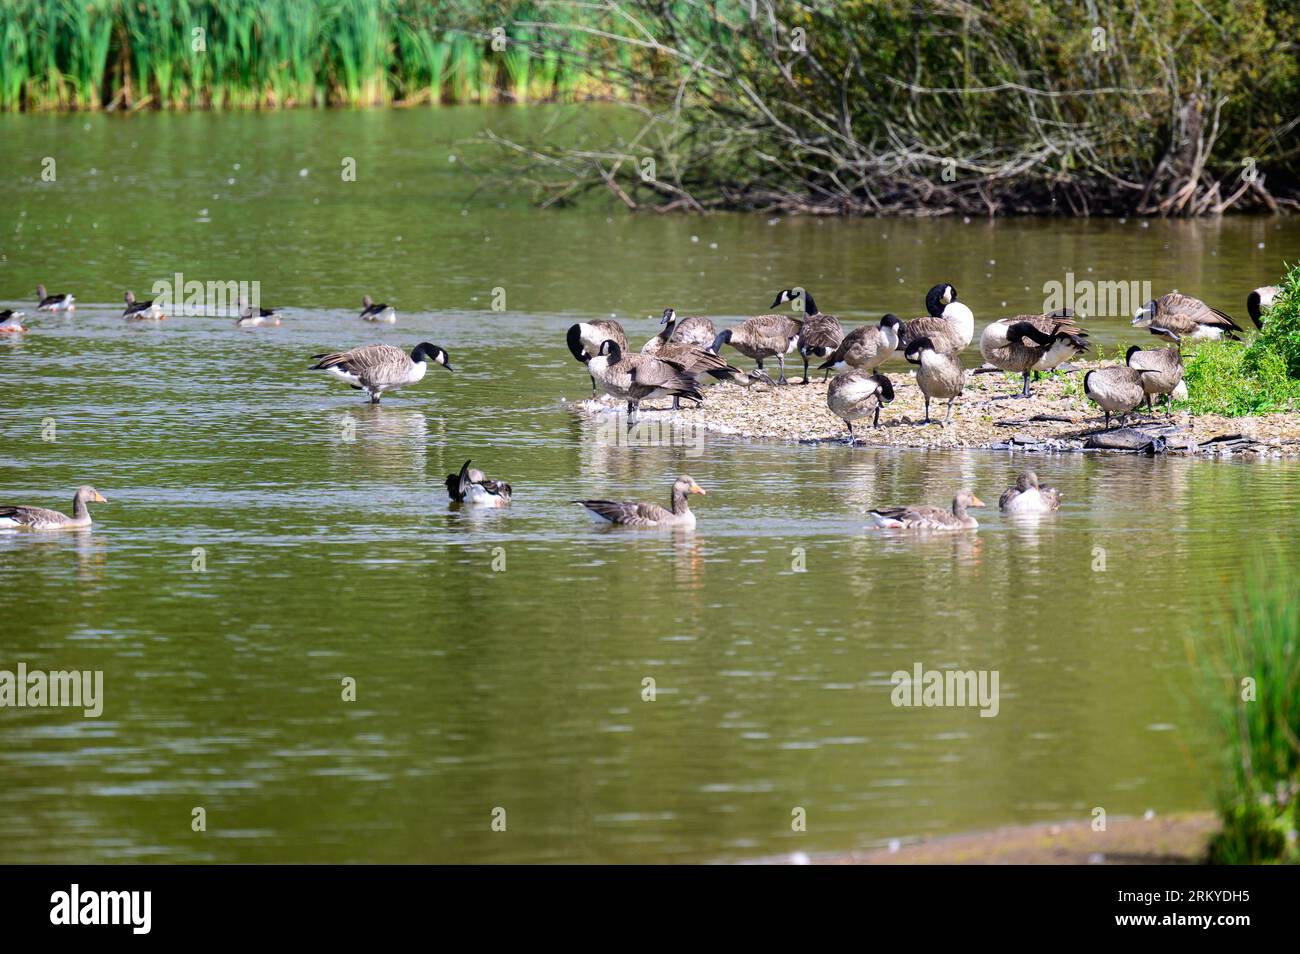 Mixed flock of wildfowl on a pond with vegetation close by. Stock Photo